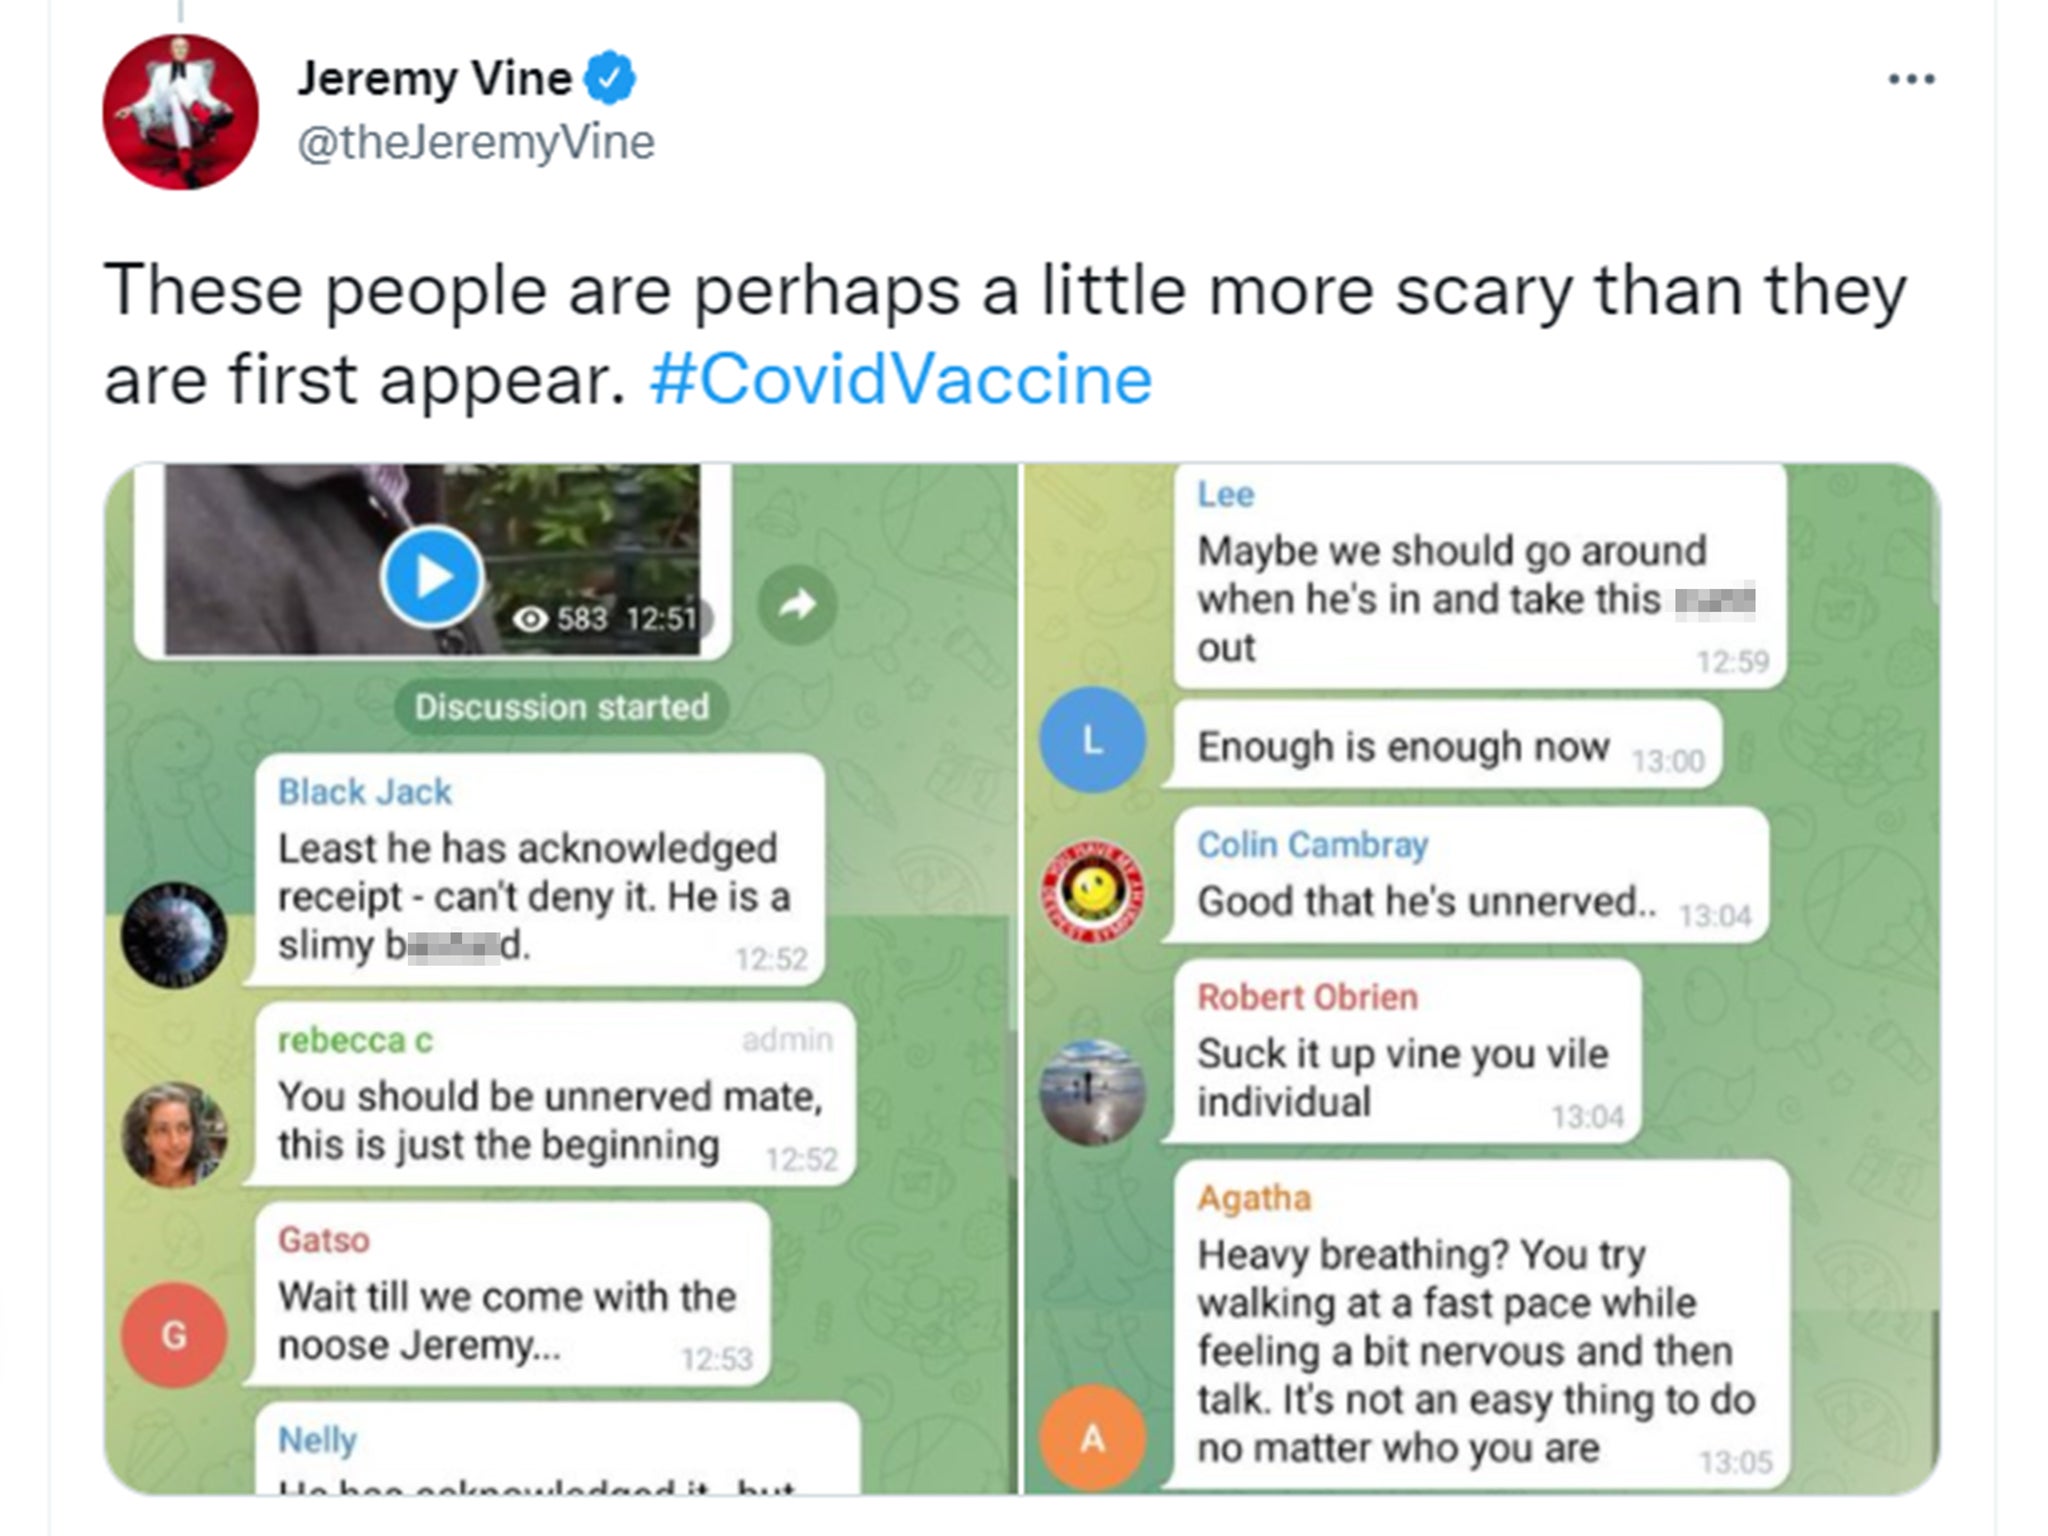 Jeremy Vine posted on Twitter threats made against him by anti-vaxxers on Telegram